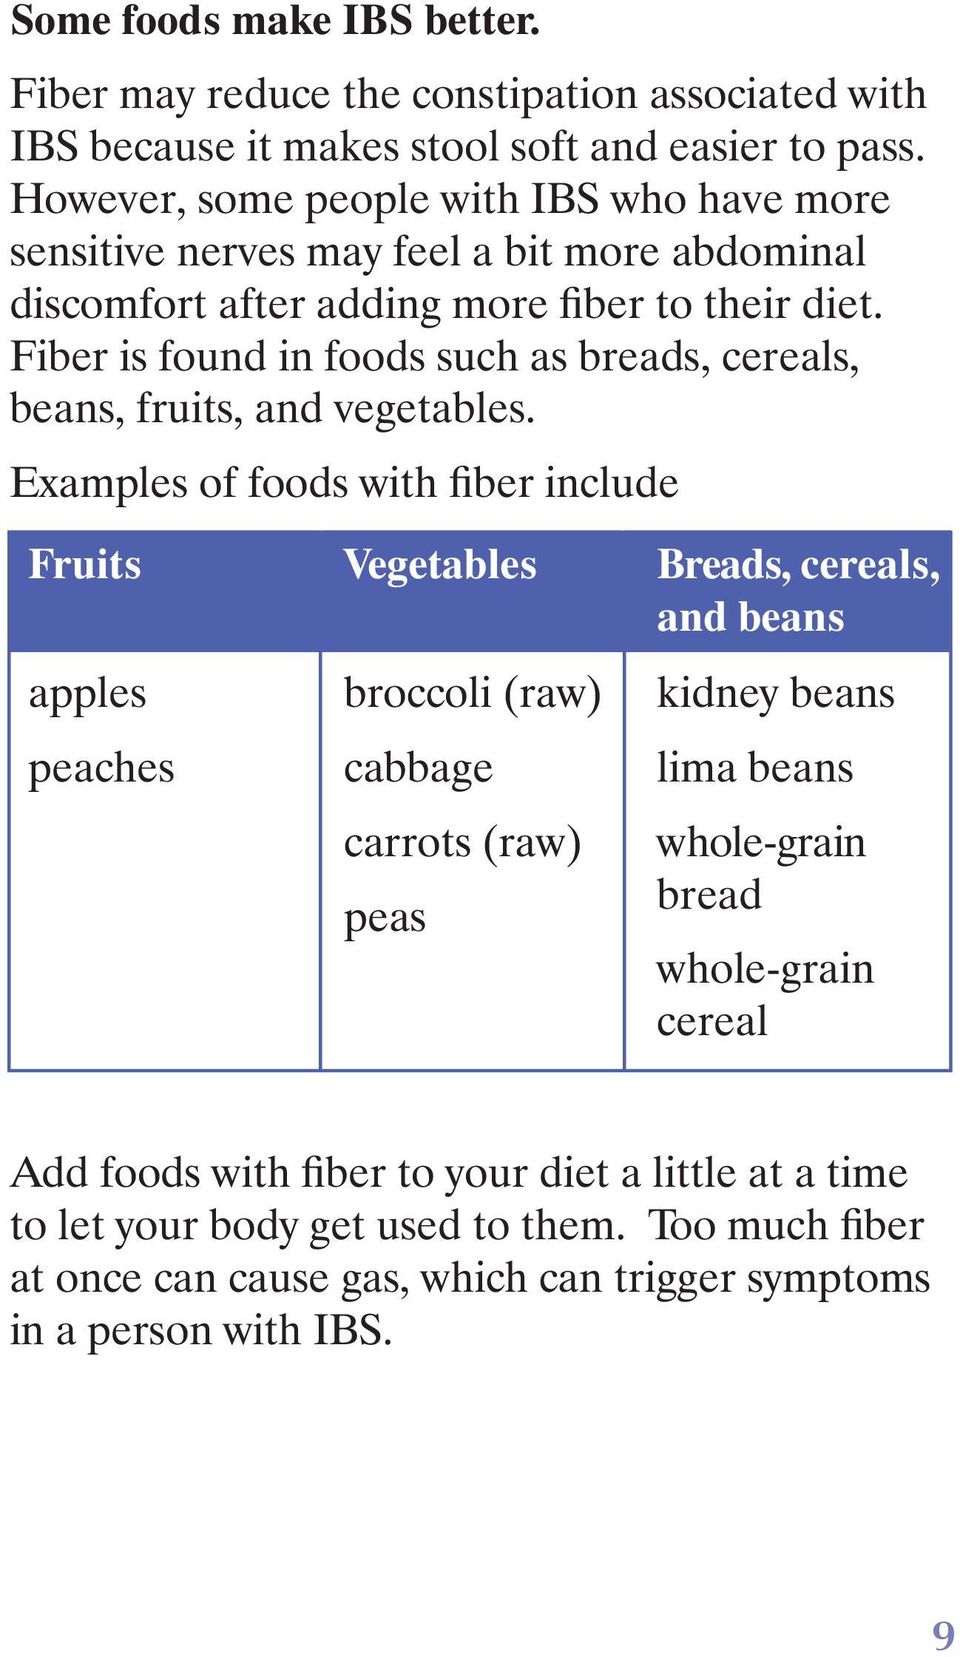 Fiber is found in foods such as breads, cereals, beans, fruits, and vegetables.